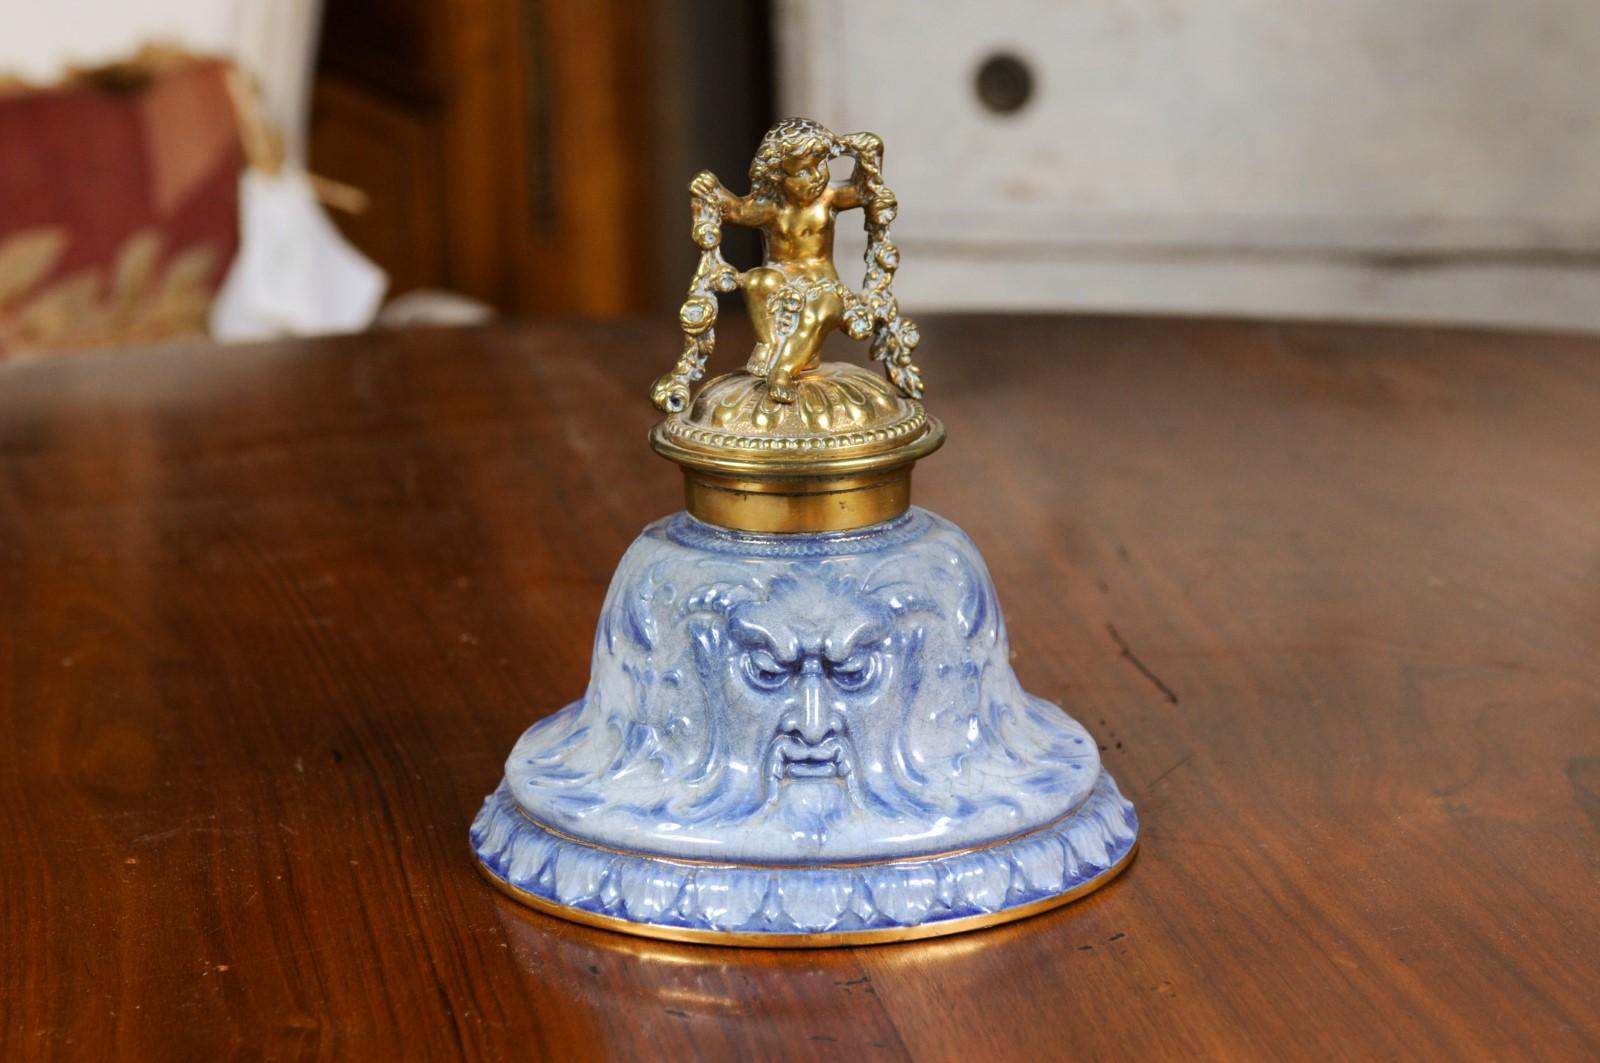 English Victorian Period 19th Century Porcelain Inkwell with Brass Putto Motif For Sale 6